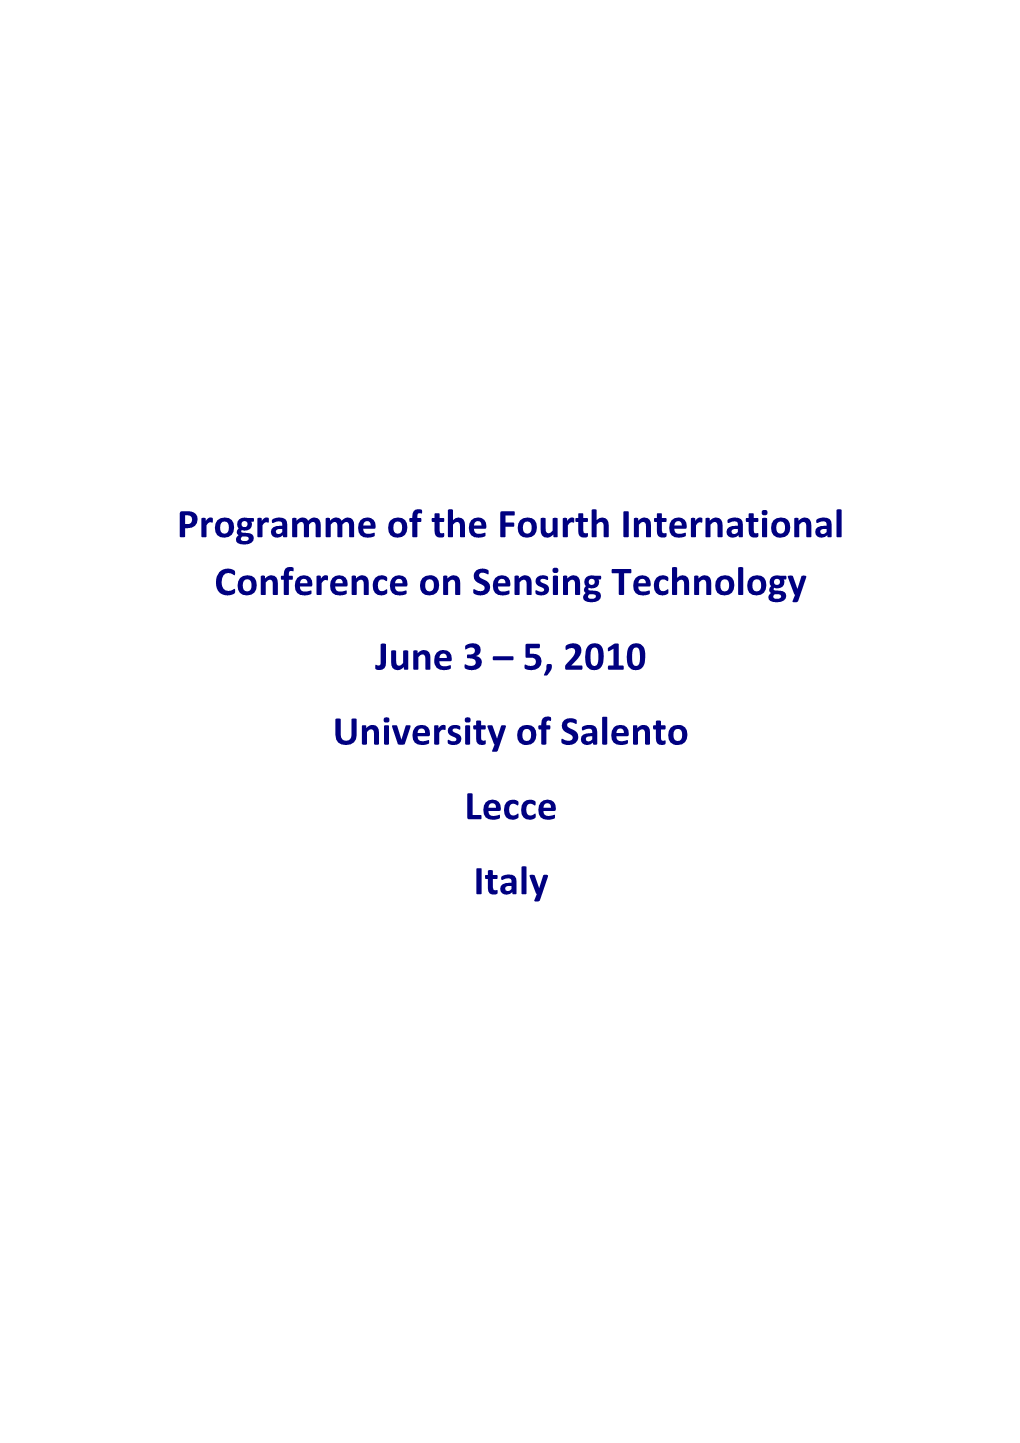 Programme of the Fourth International Conference on Sensing Technology